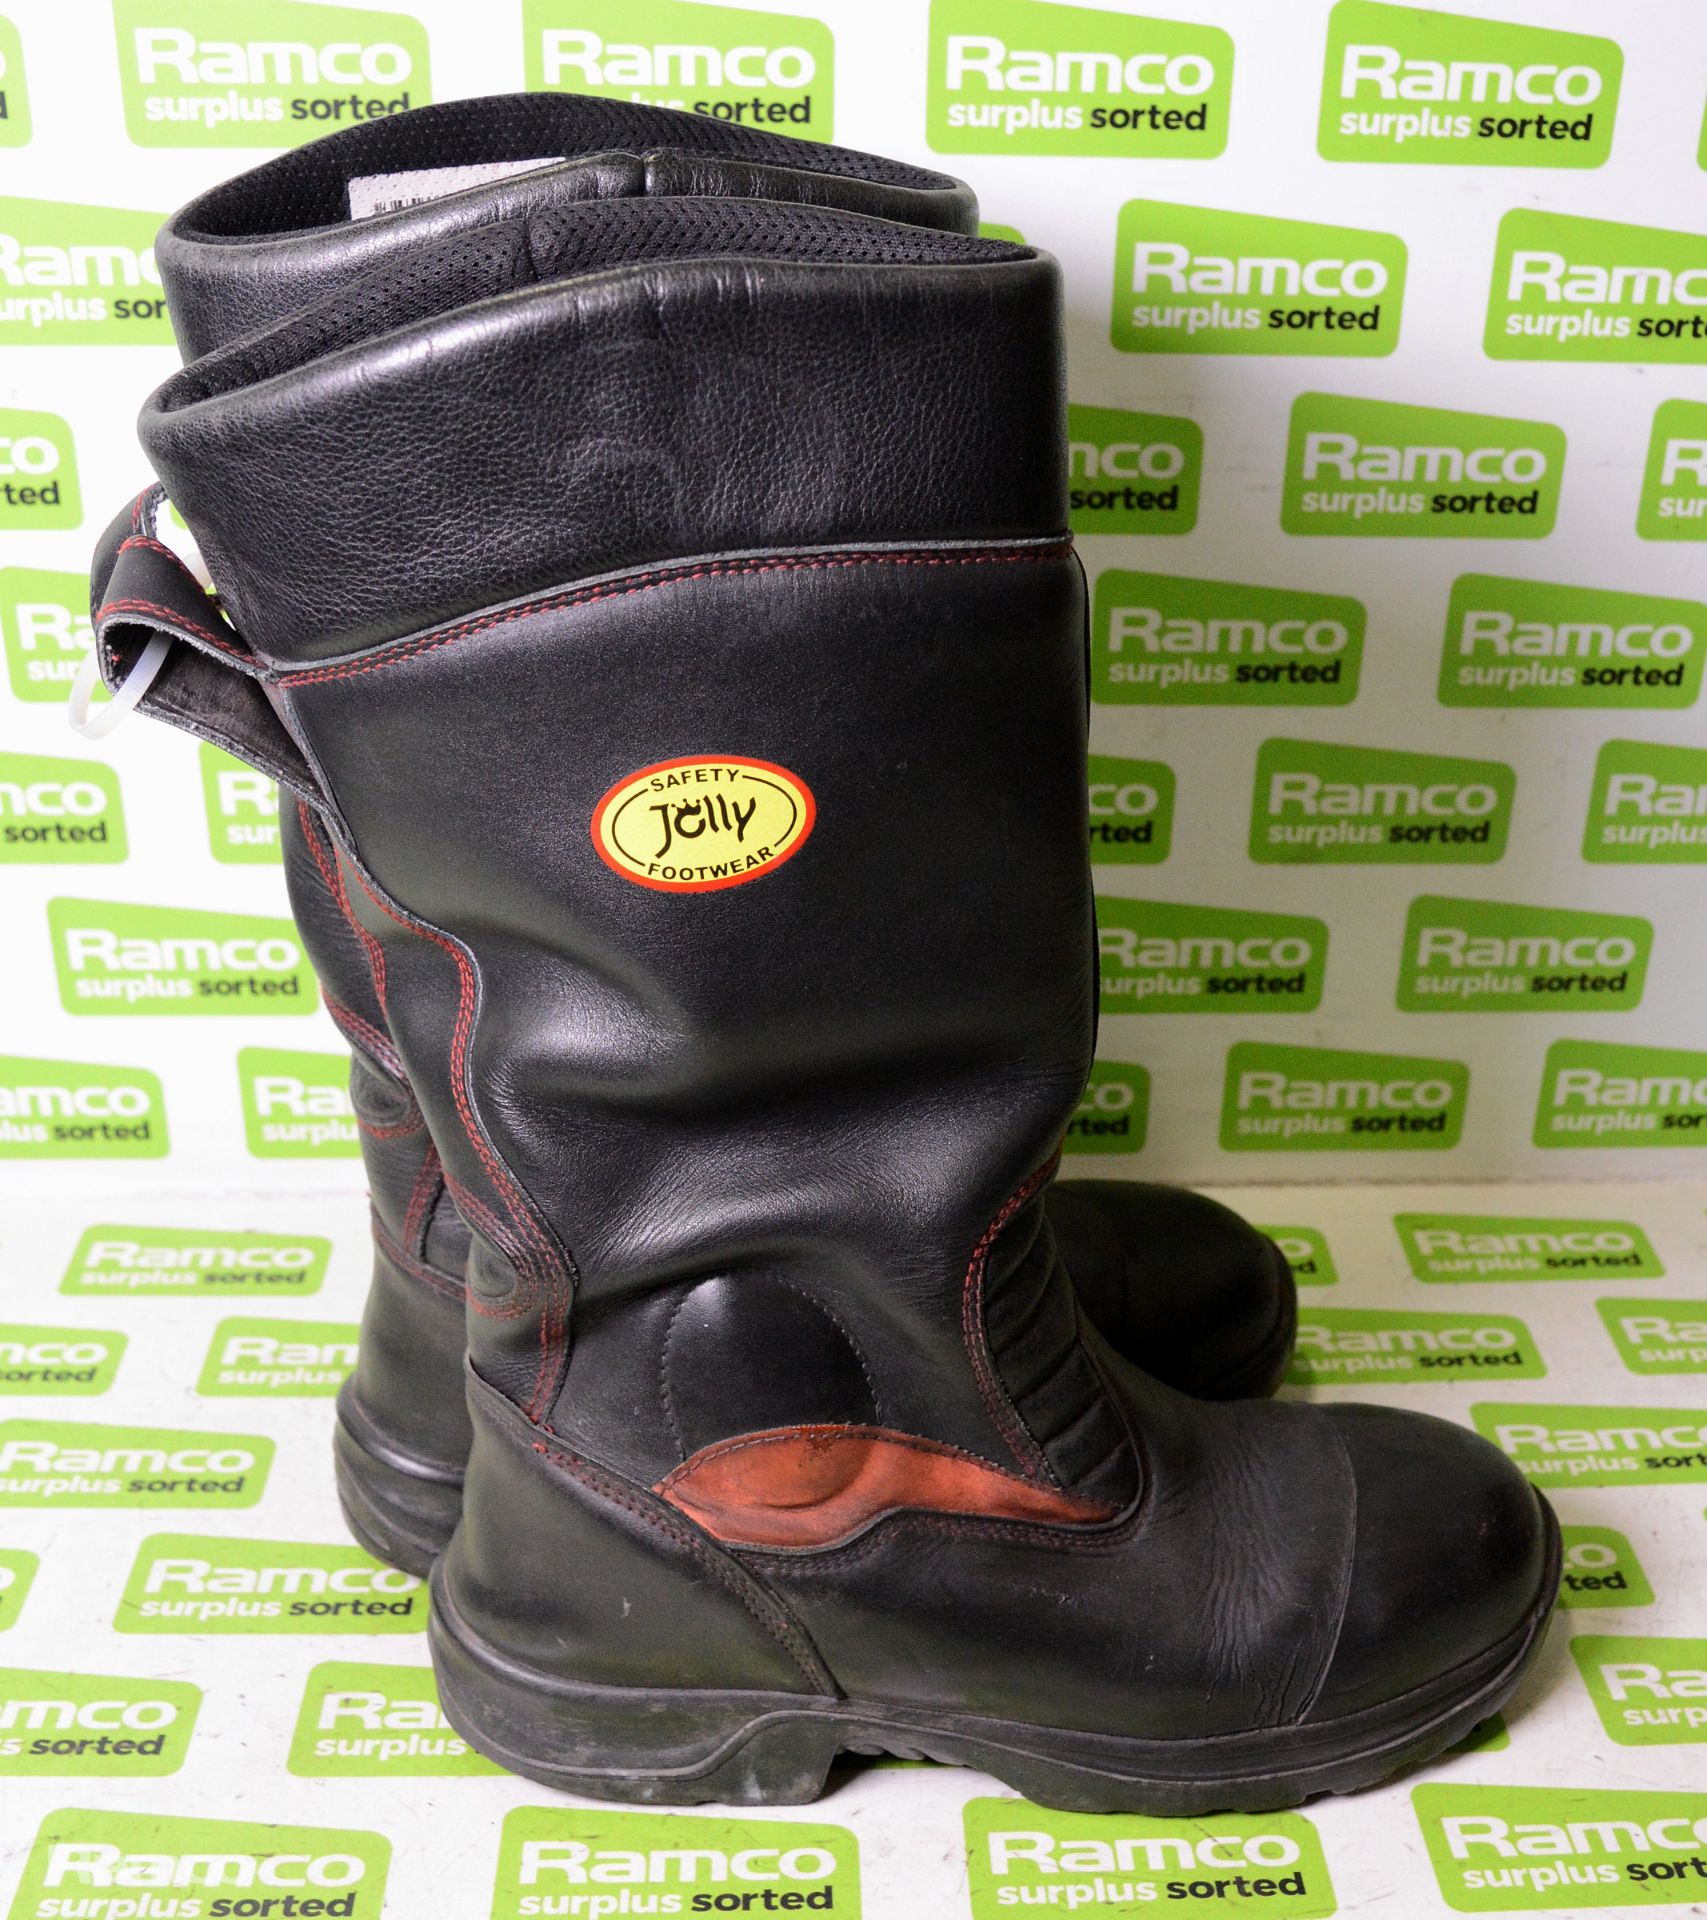 Jolly Safety Footwear CE 0498 boots - size: EU 43, UK 9 - Image 2 of 3